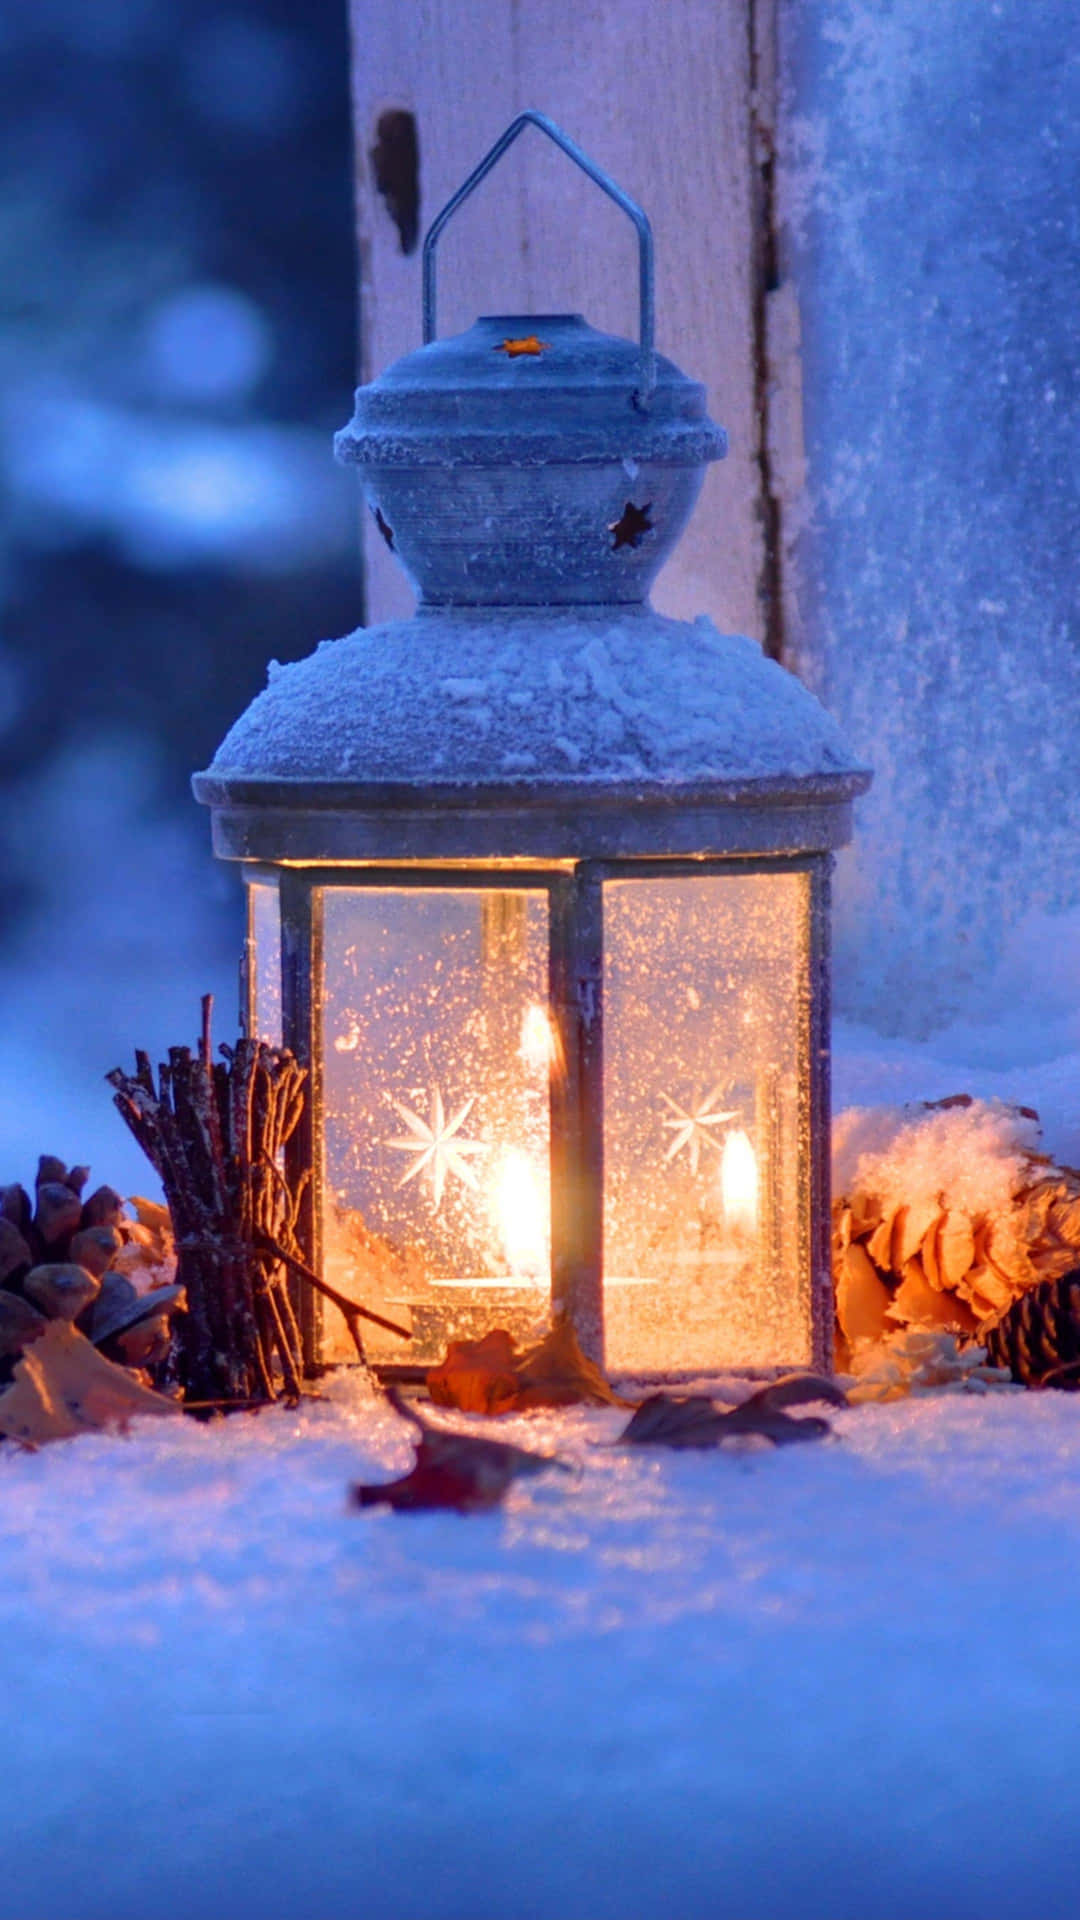 A Lantern Is Lit Up In The Snow